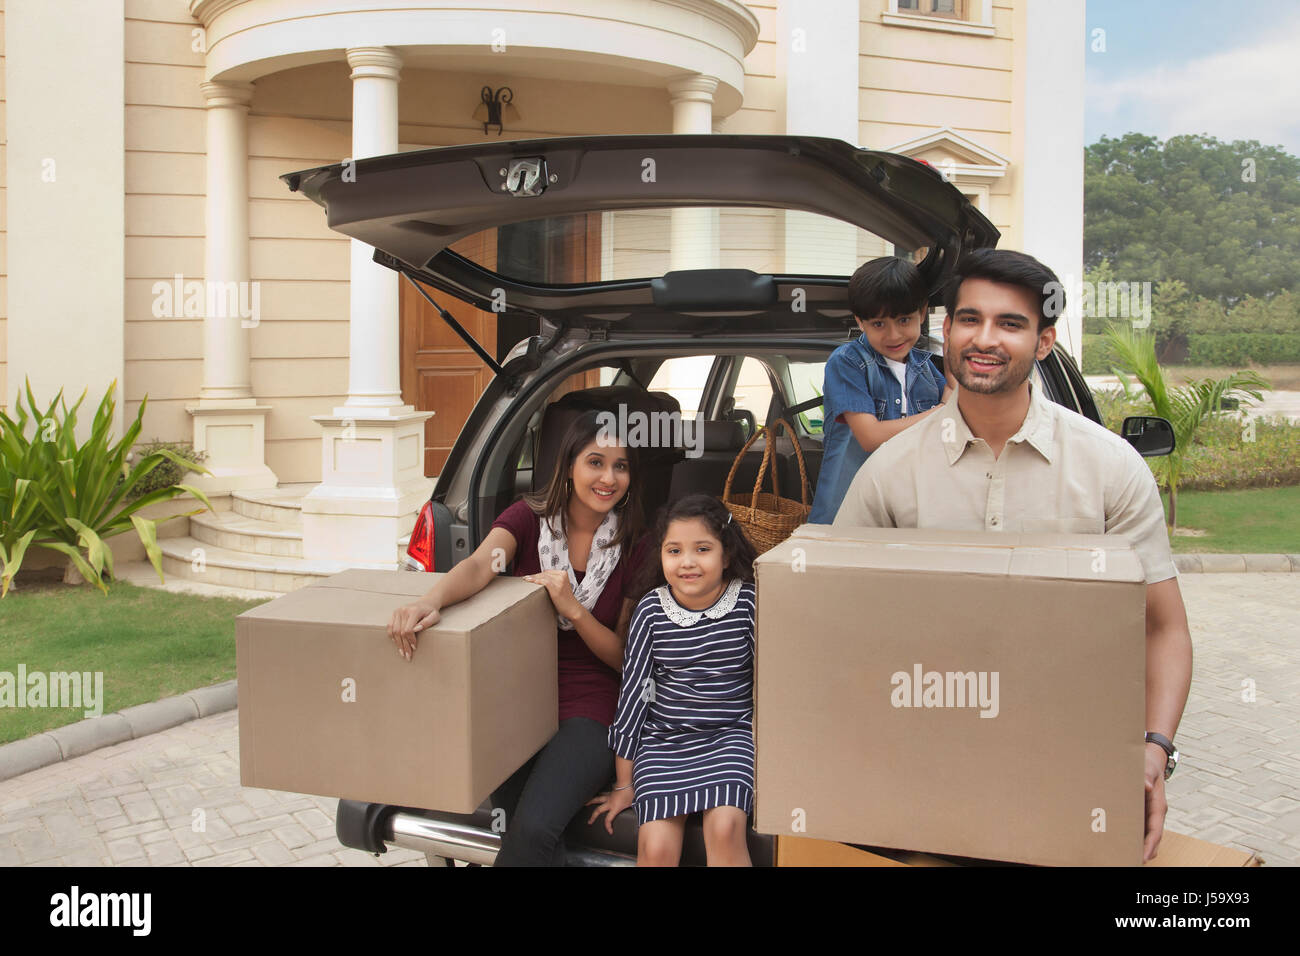 Family unpacking cardboard boxes from car Stock Photo